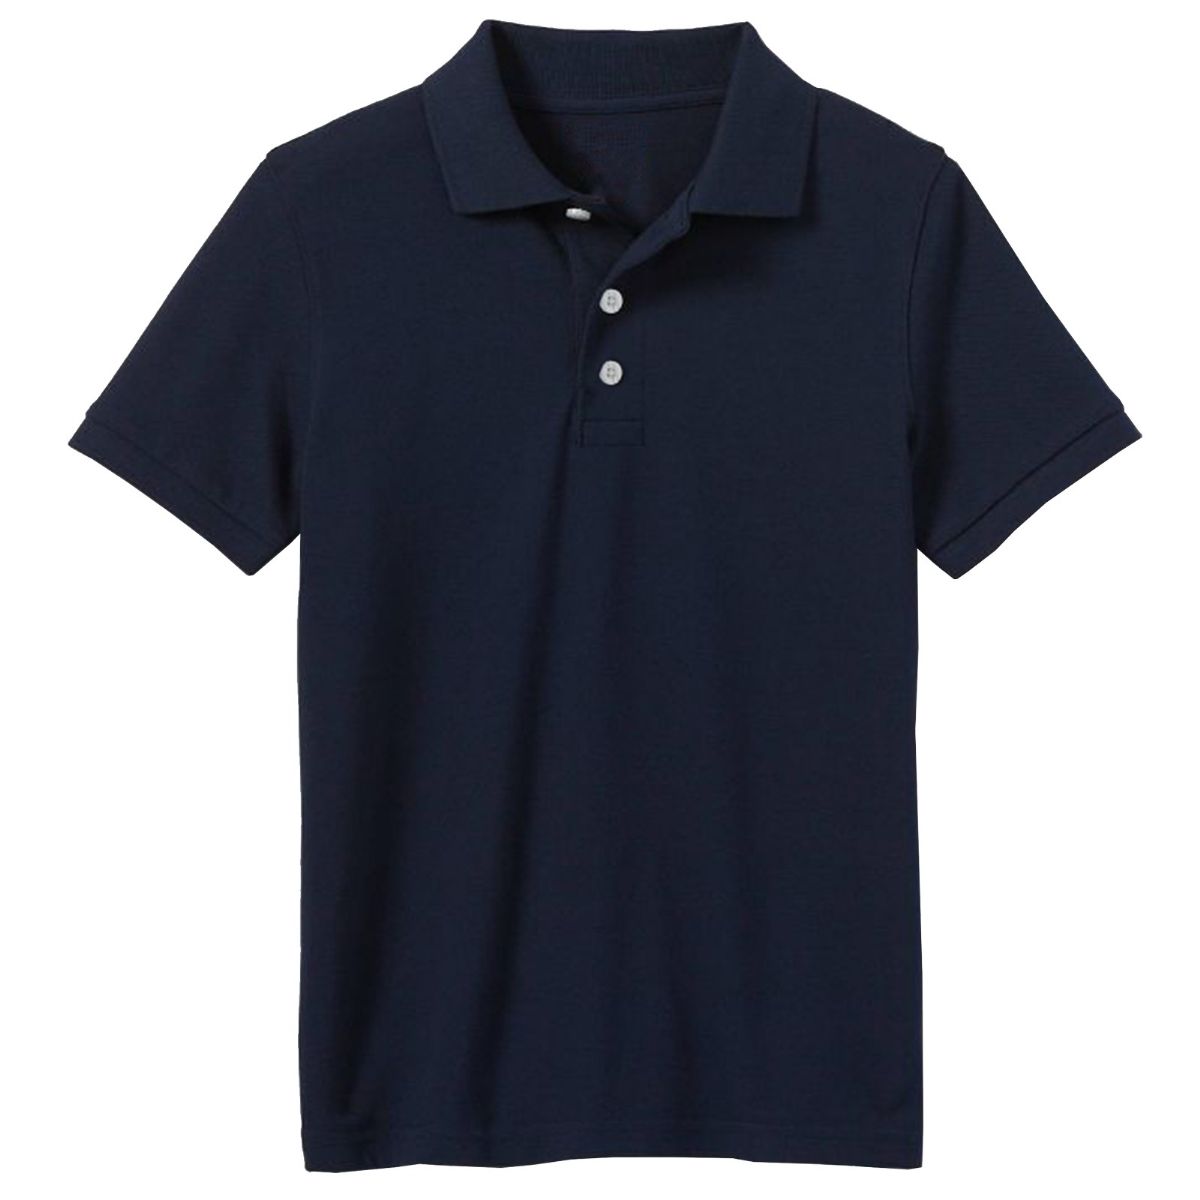 24 Pieces of Youth Polo Shirt Navy In Size L